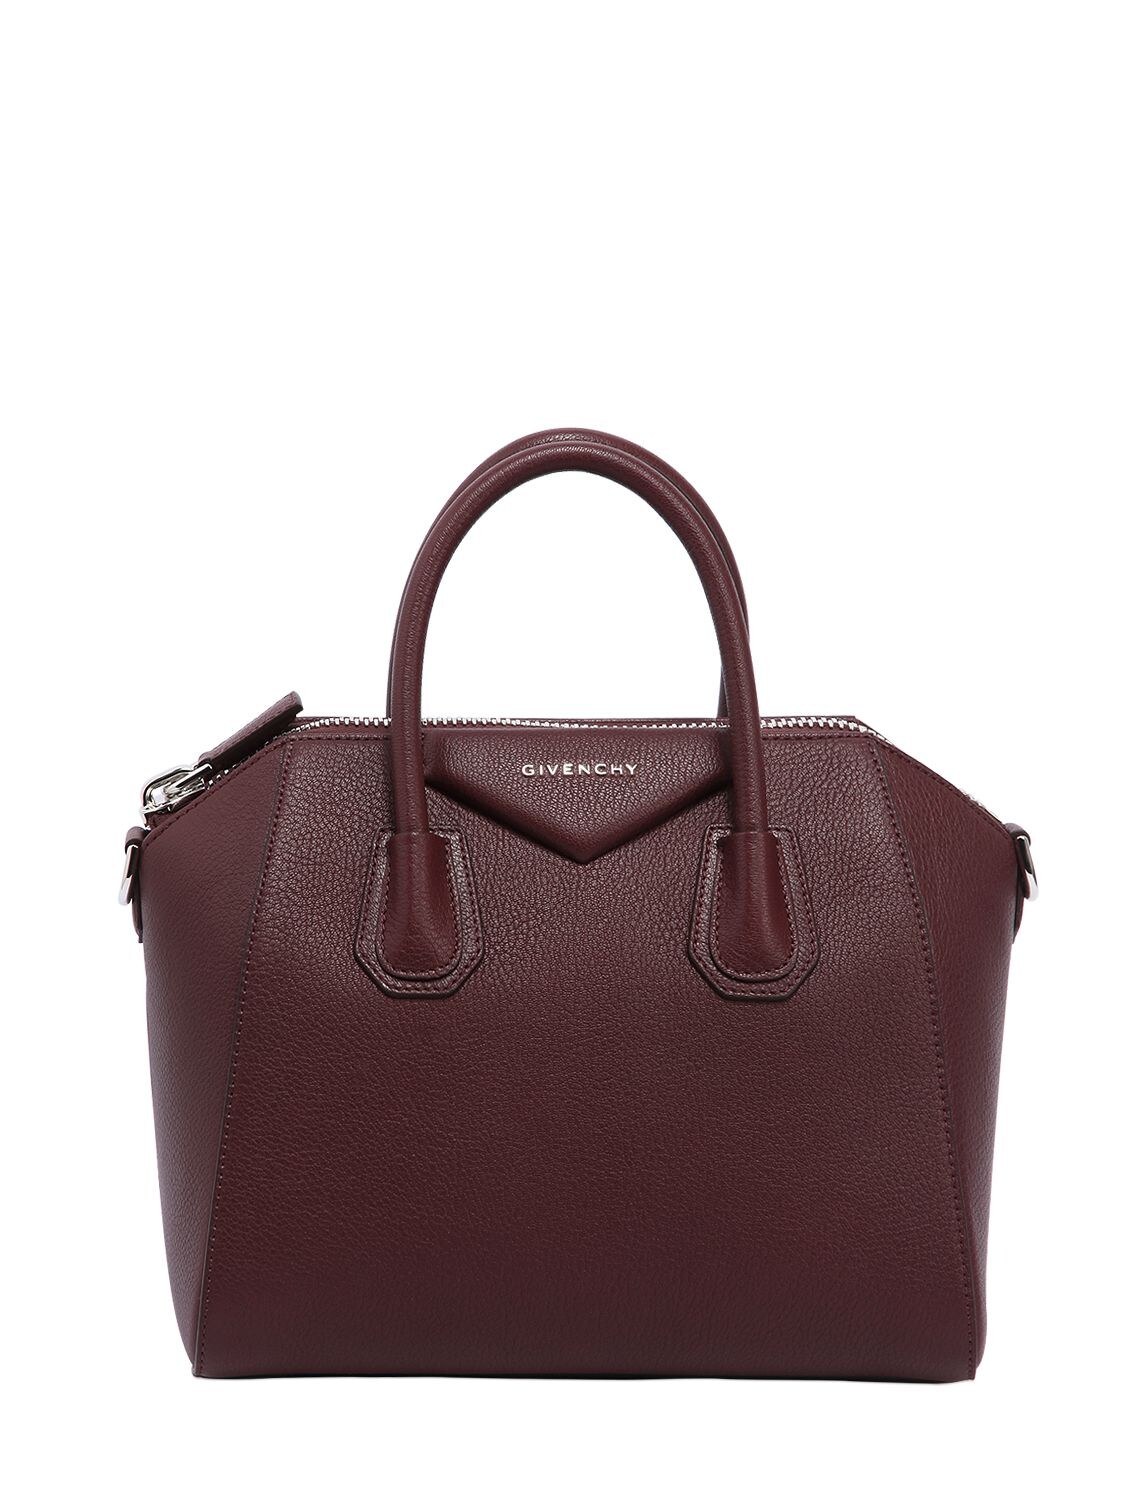 Givenchy Small Antigona Grained Leather Bag In Ox Blood